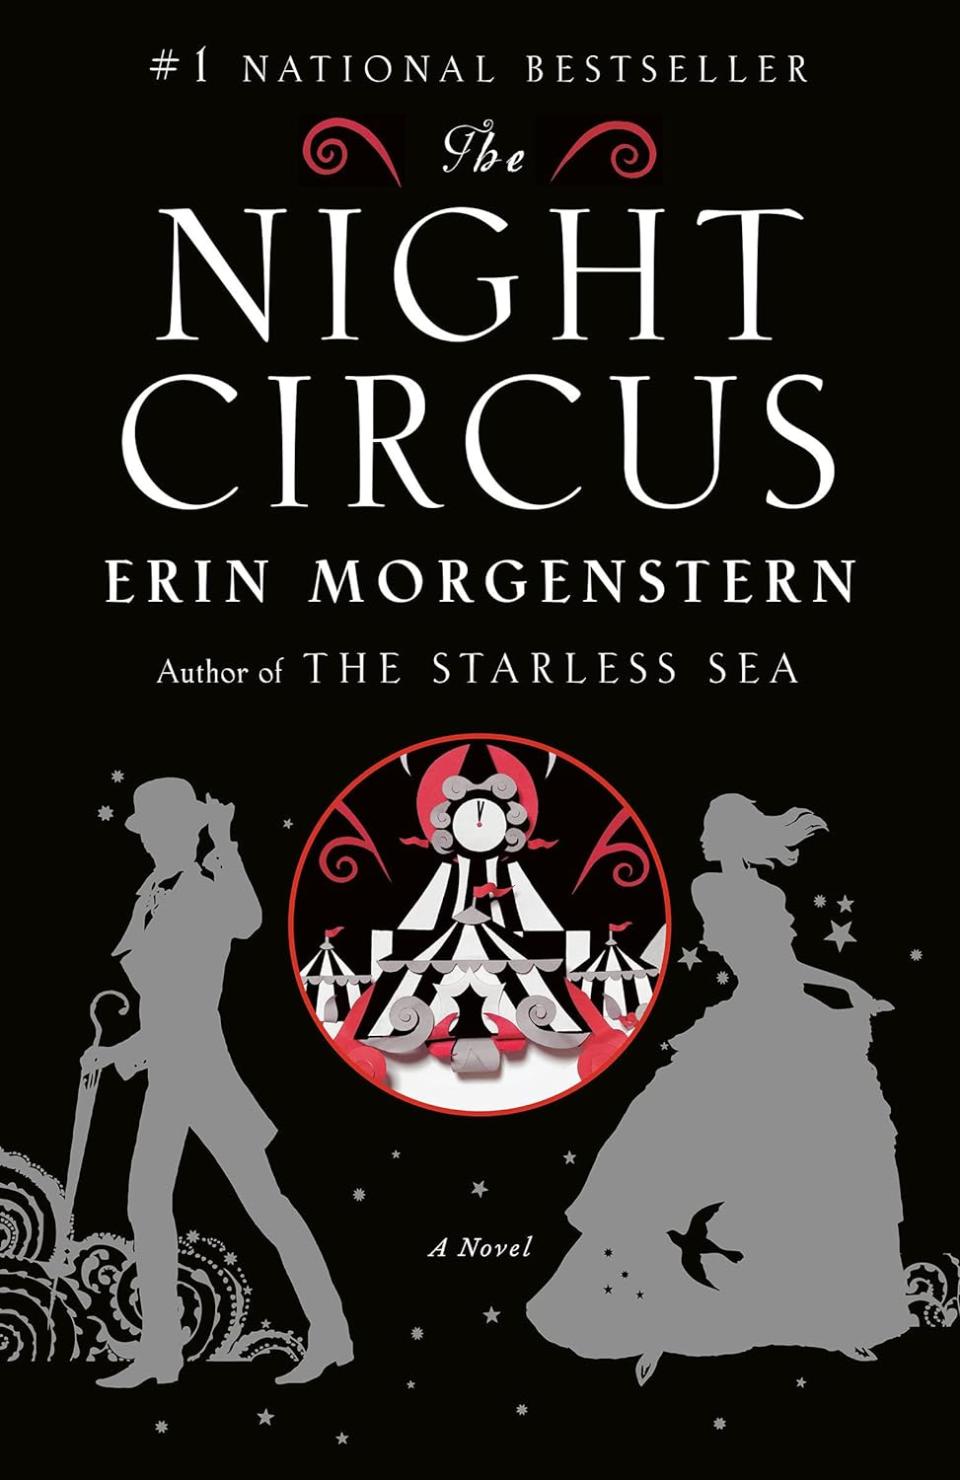 Cozy Fall Reads: The Night Circus by Erin Morgenstern book cover shows an illustration of a male magician and a female magician